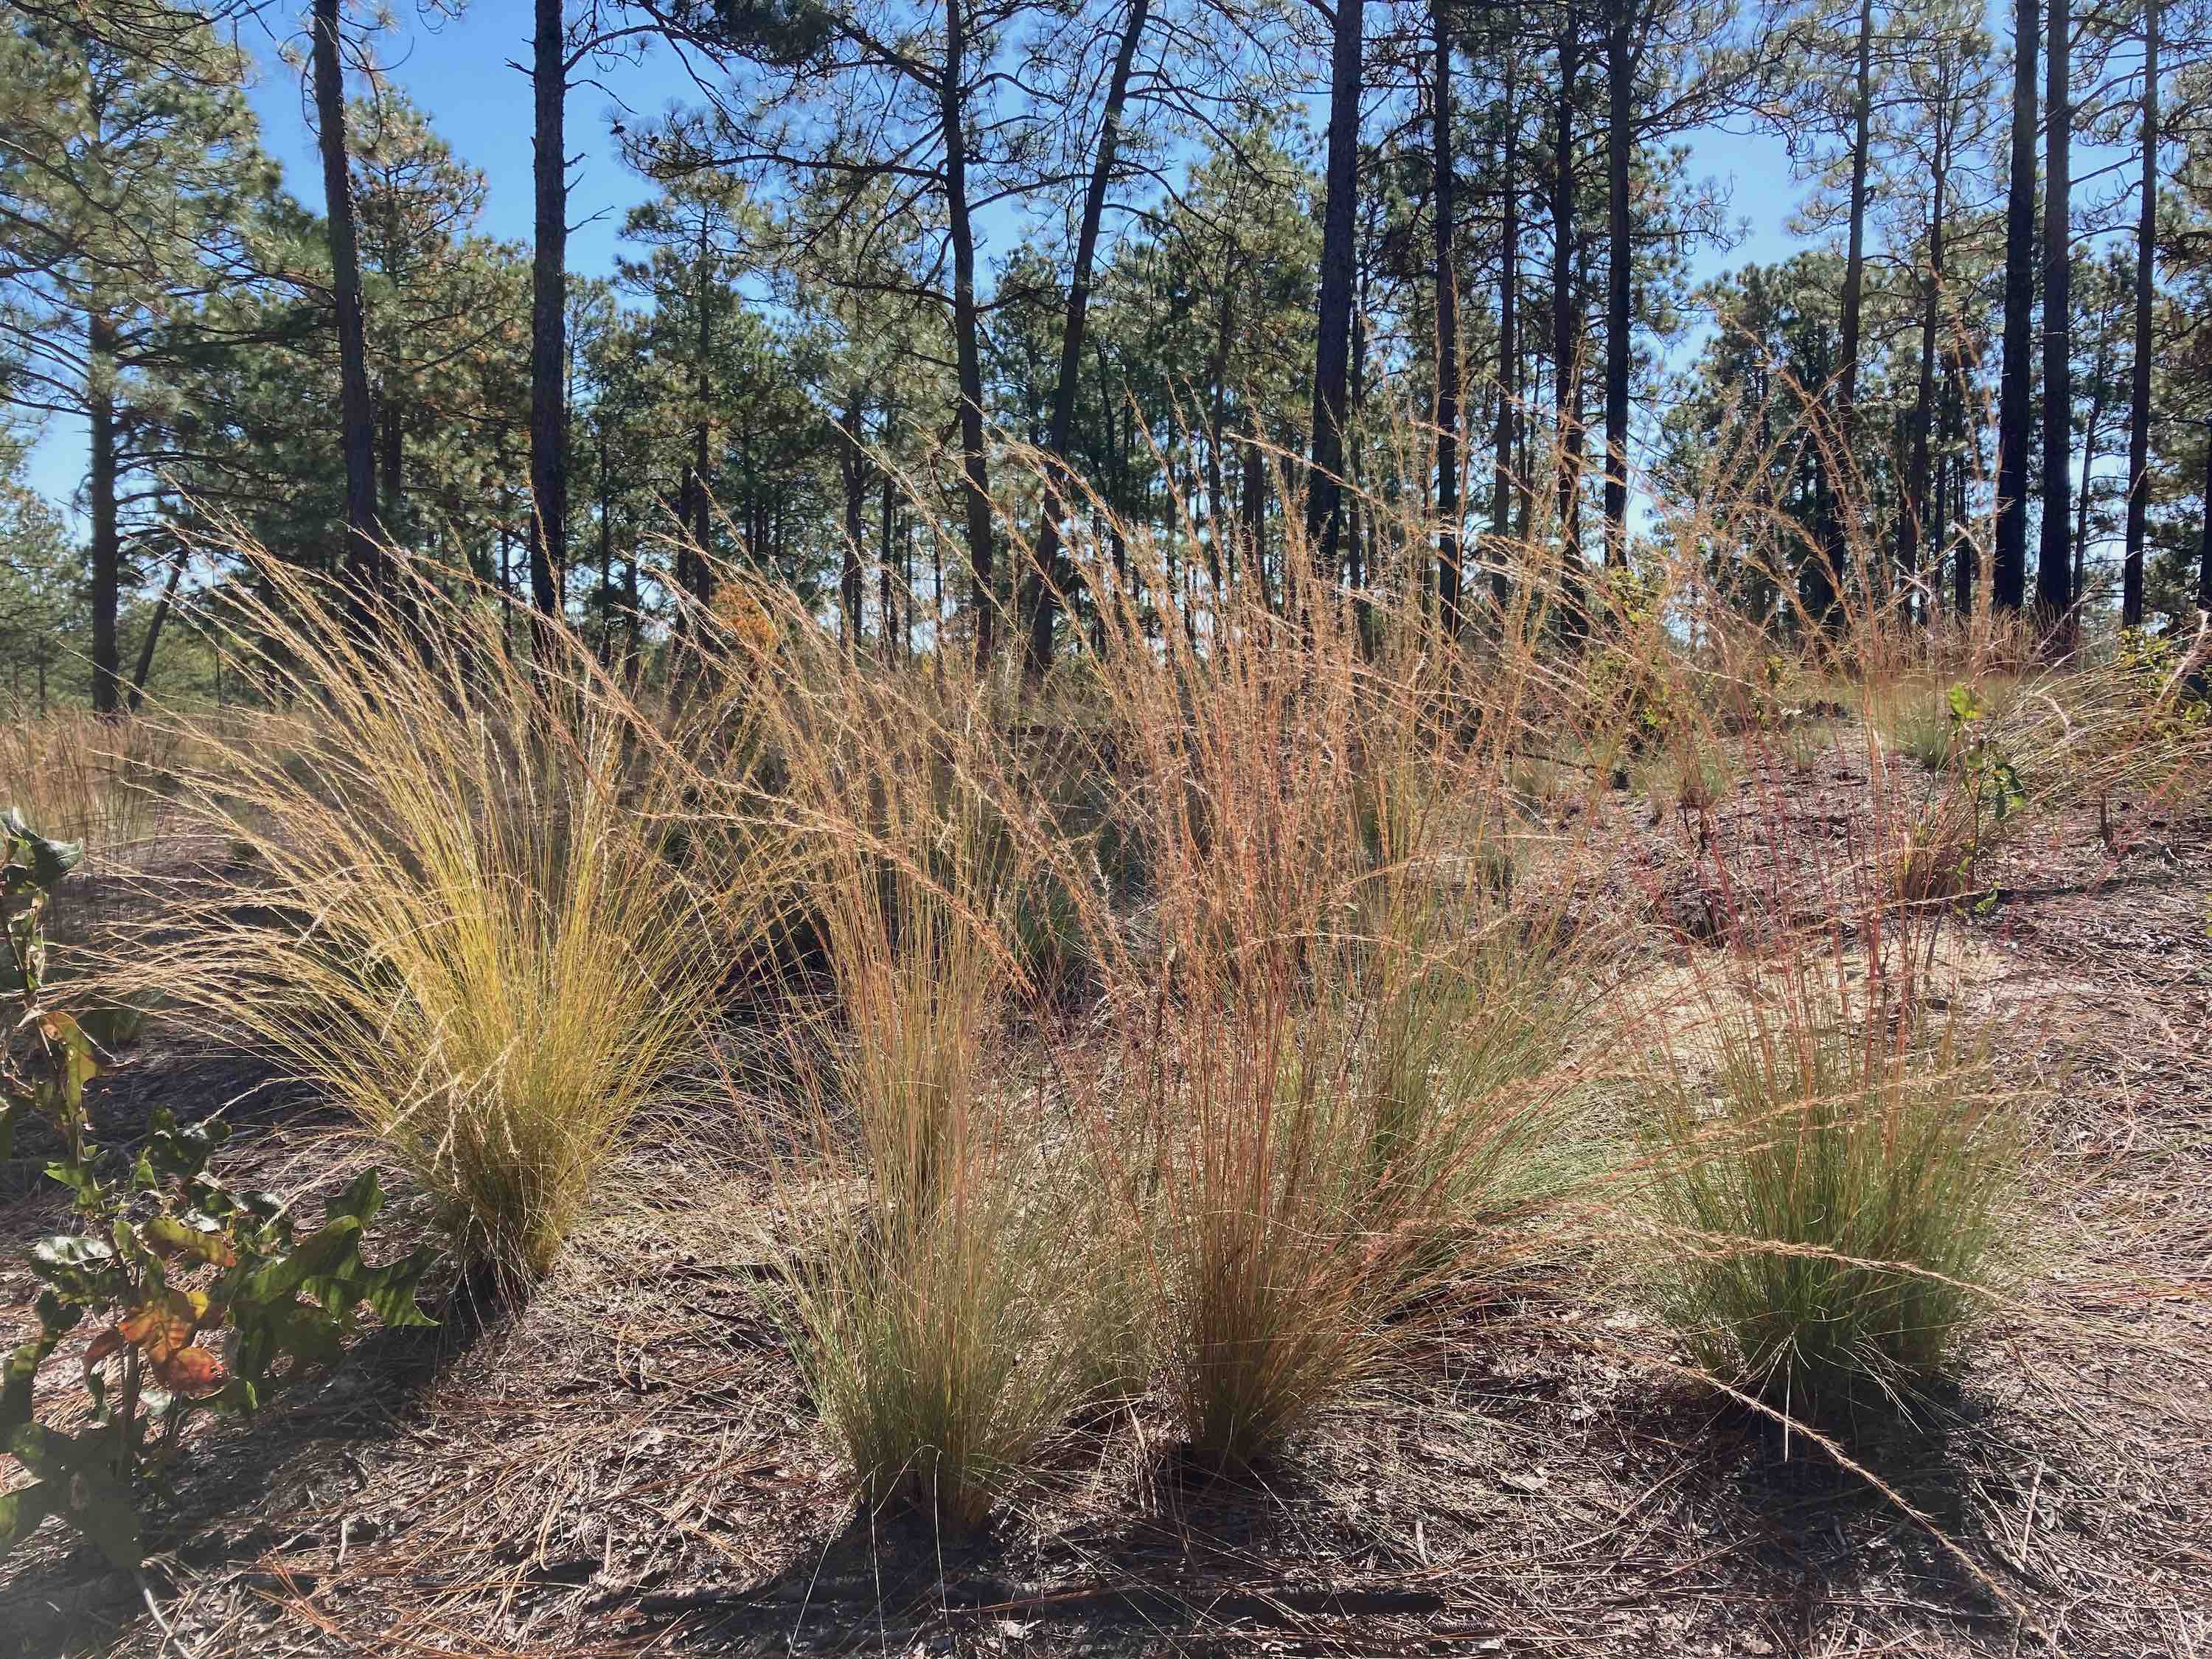 The Scientific Name is Aristida stricta [= Aristida stricta var. stricta]. You will likely hear them called Carolina Wiregrass, Pineland Three-awn. This picture shows the Typically found in longleaf Pine <em>(Pinus palustris)</em> savannahs. of Aristida stricta [= Aristida stricta var. stricta]